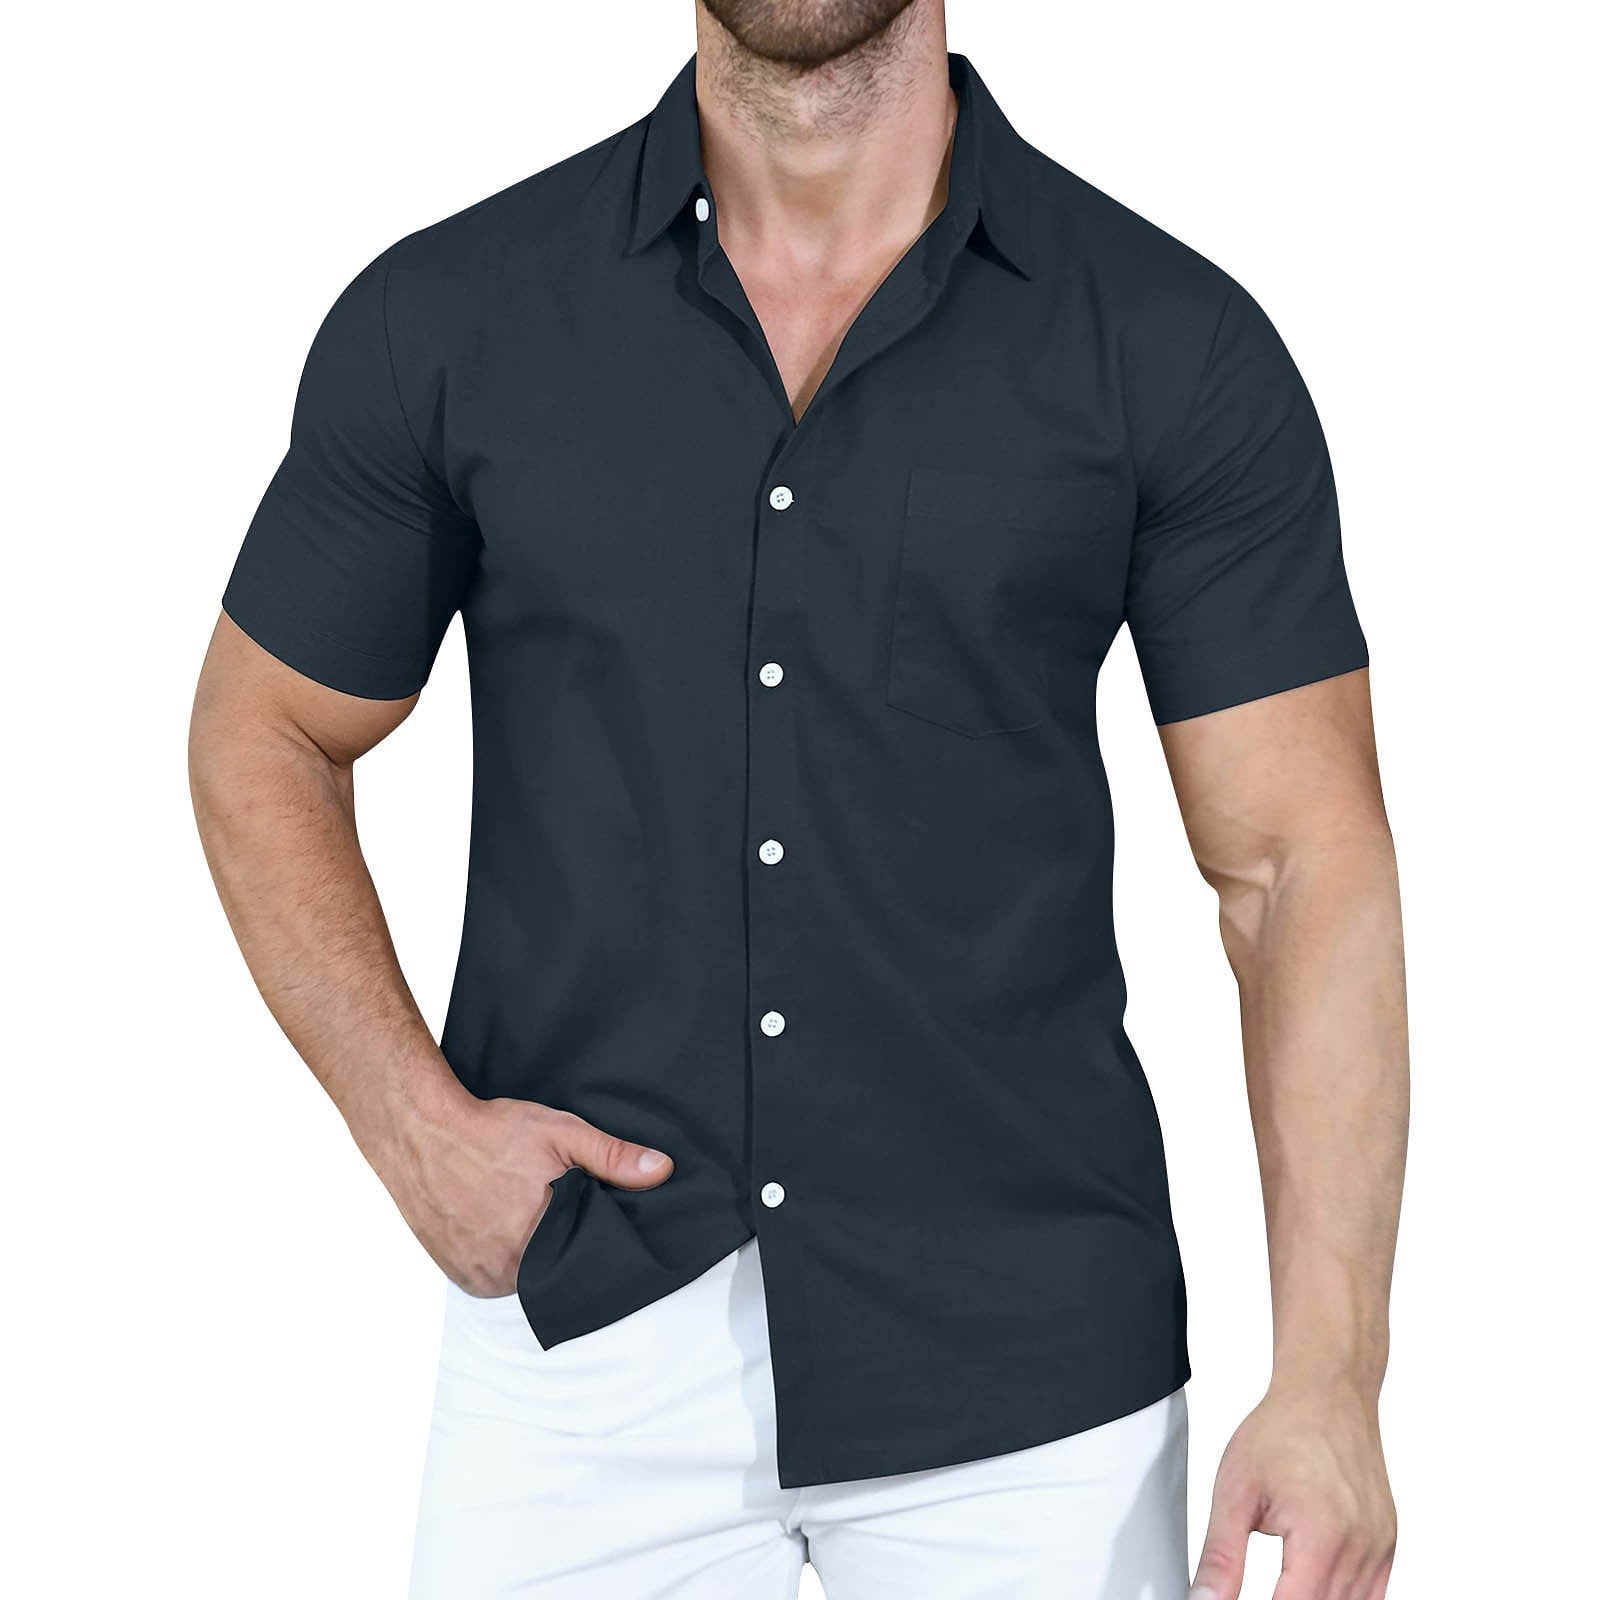 Clearance! OTEMRCLOC Men's Classic Regular Fit Button Down Short Sleeve ...